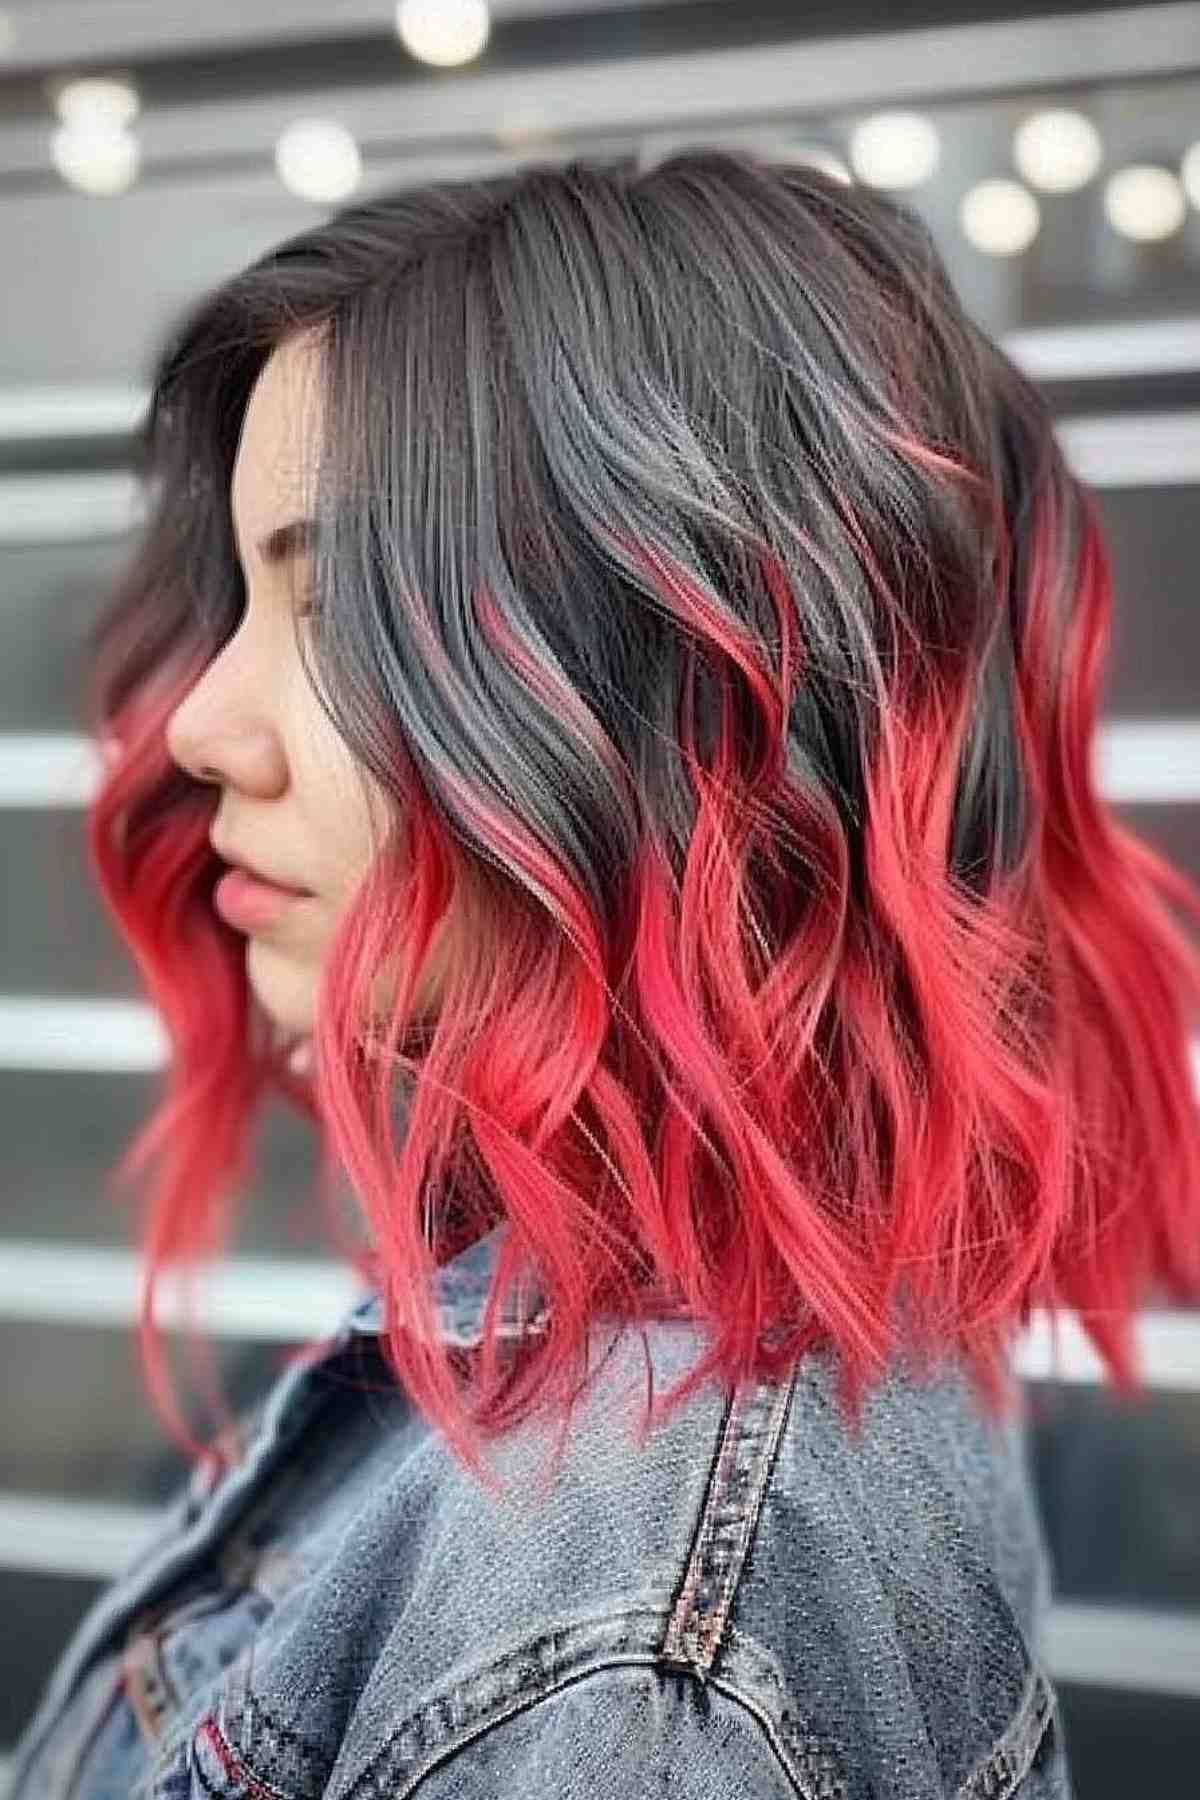 Textured medium lob with dark roots transitioning to vibrant red ombre.